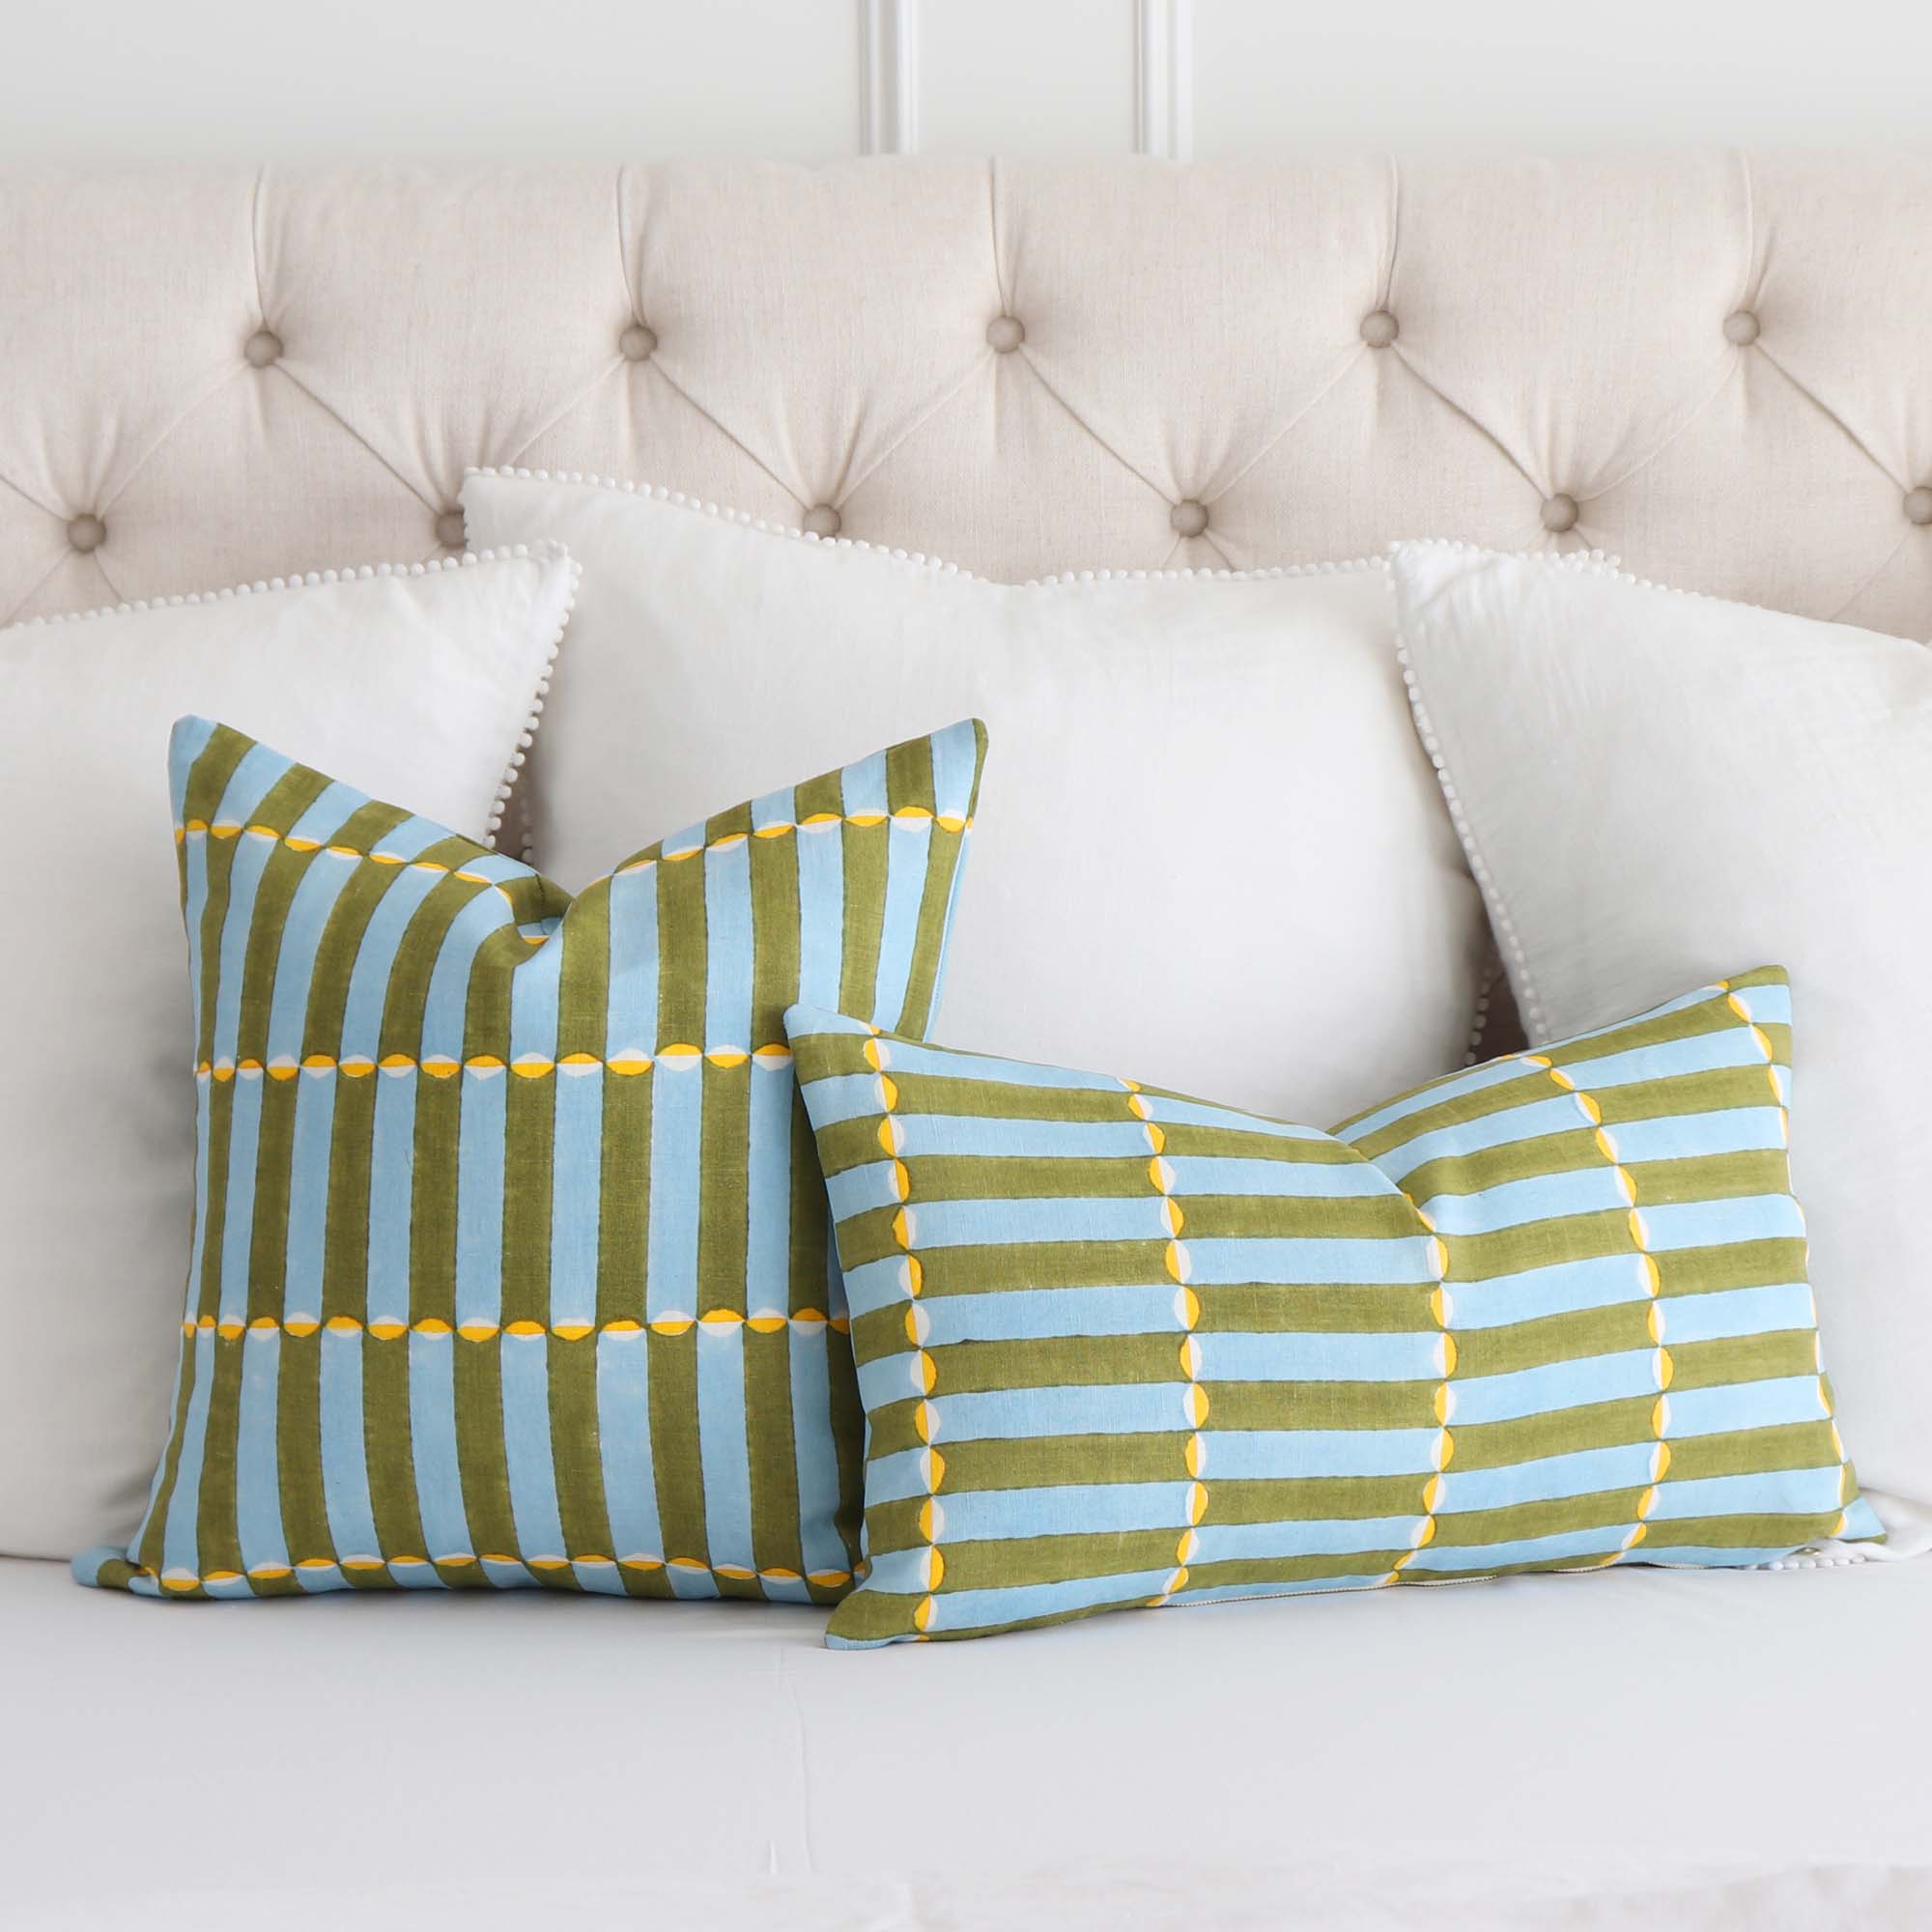 https://www.chloeandolive.com/cdn/shop/products/Schumacher-Luna-179282-Khaki-and-Turquoise-Blue-Graphic-Block-Print-Designer-Luxury-Decorative-Throw-Pillow-Cover-on-Queen-Bed-with-White-Euro-Shams_5000x.jpg?v=1665072421